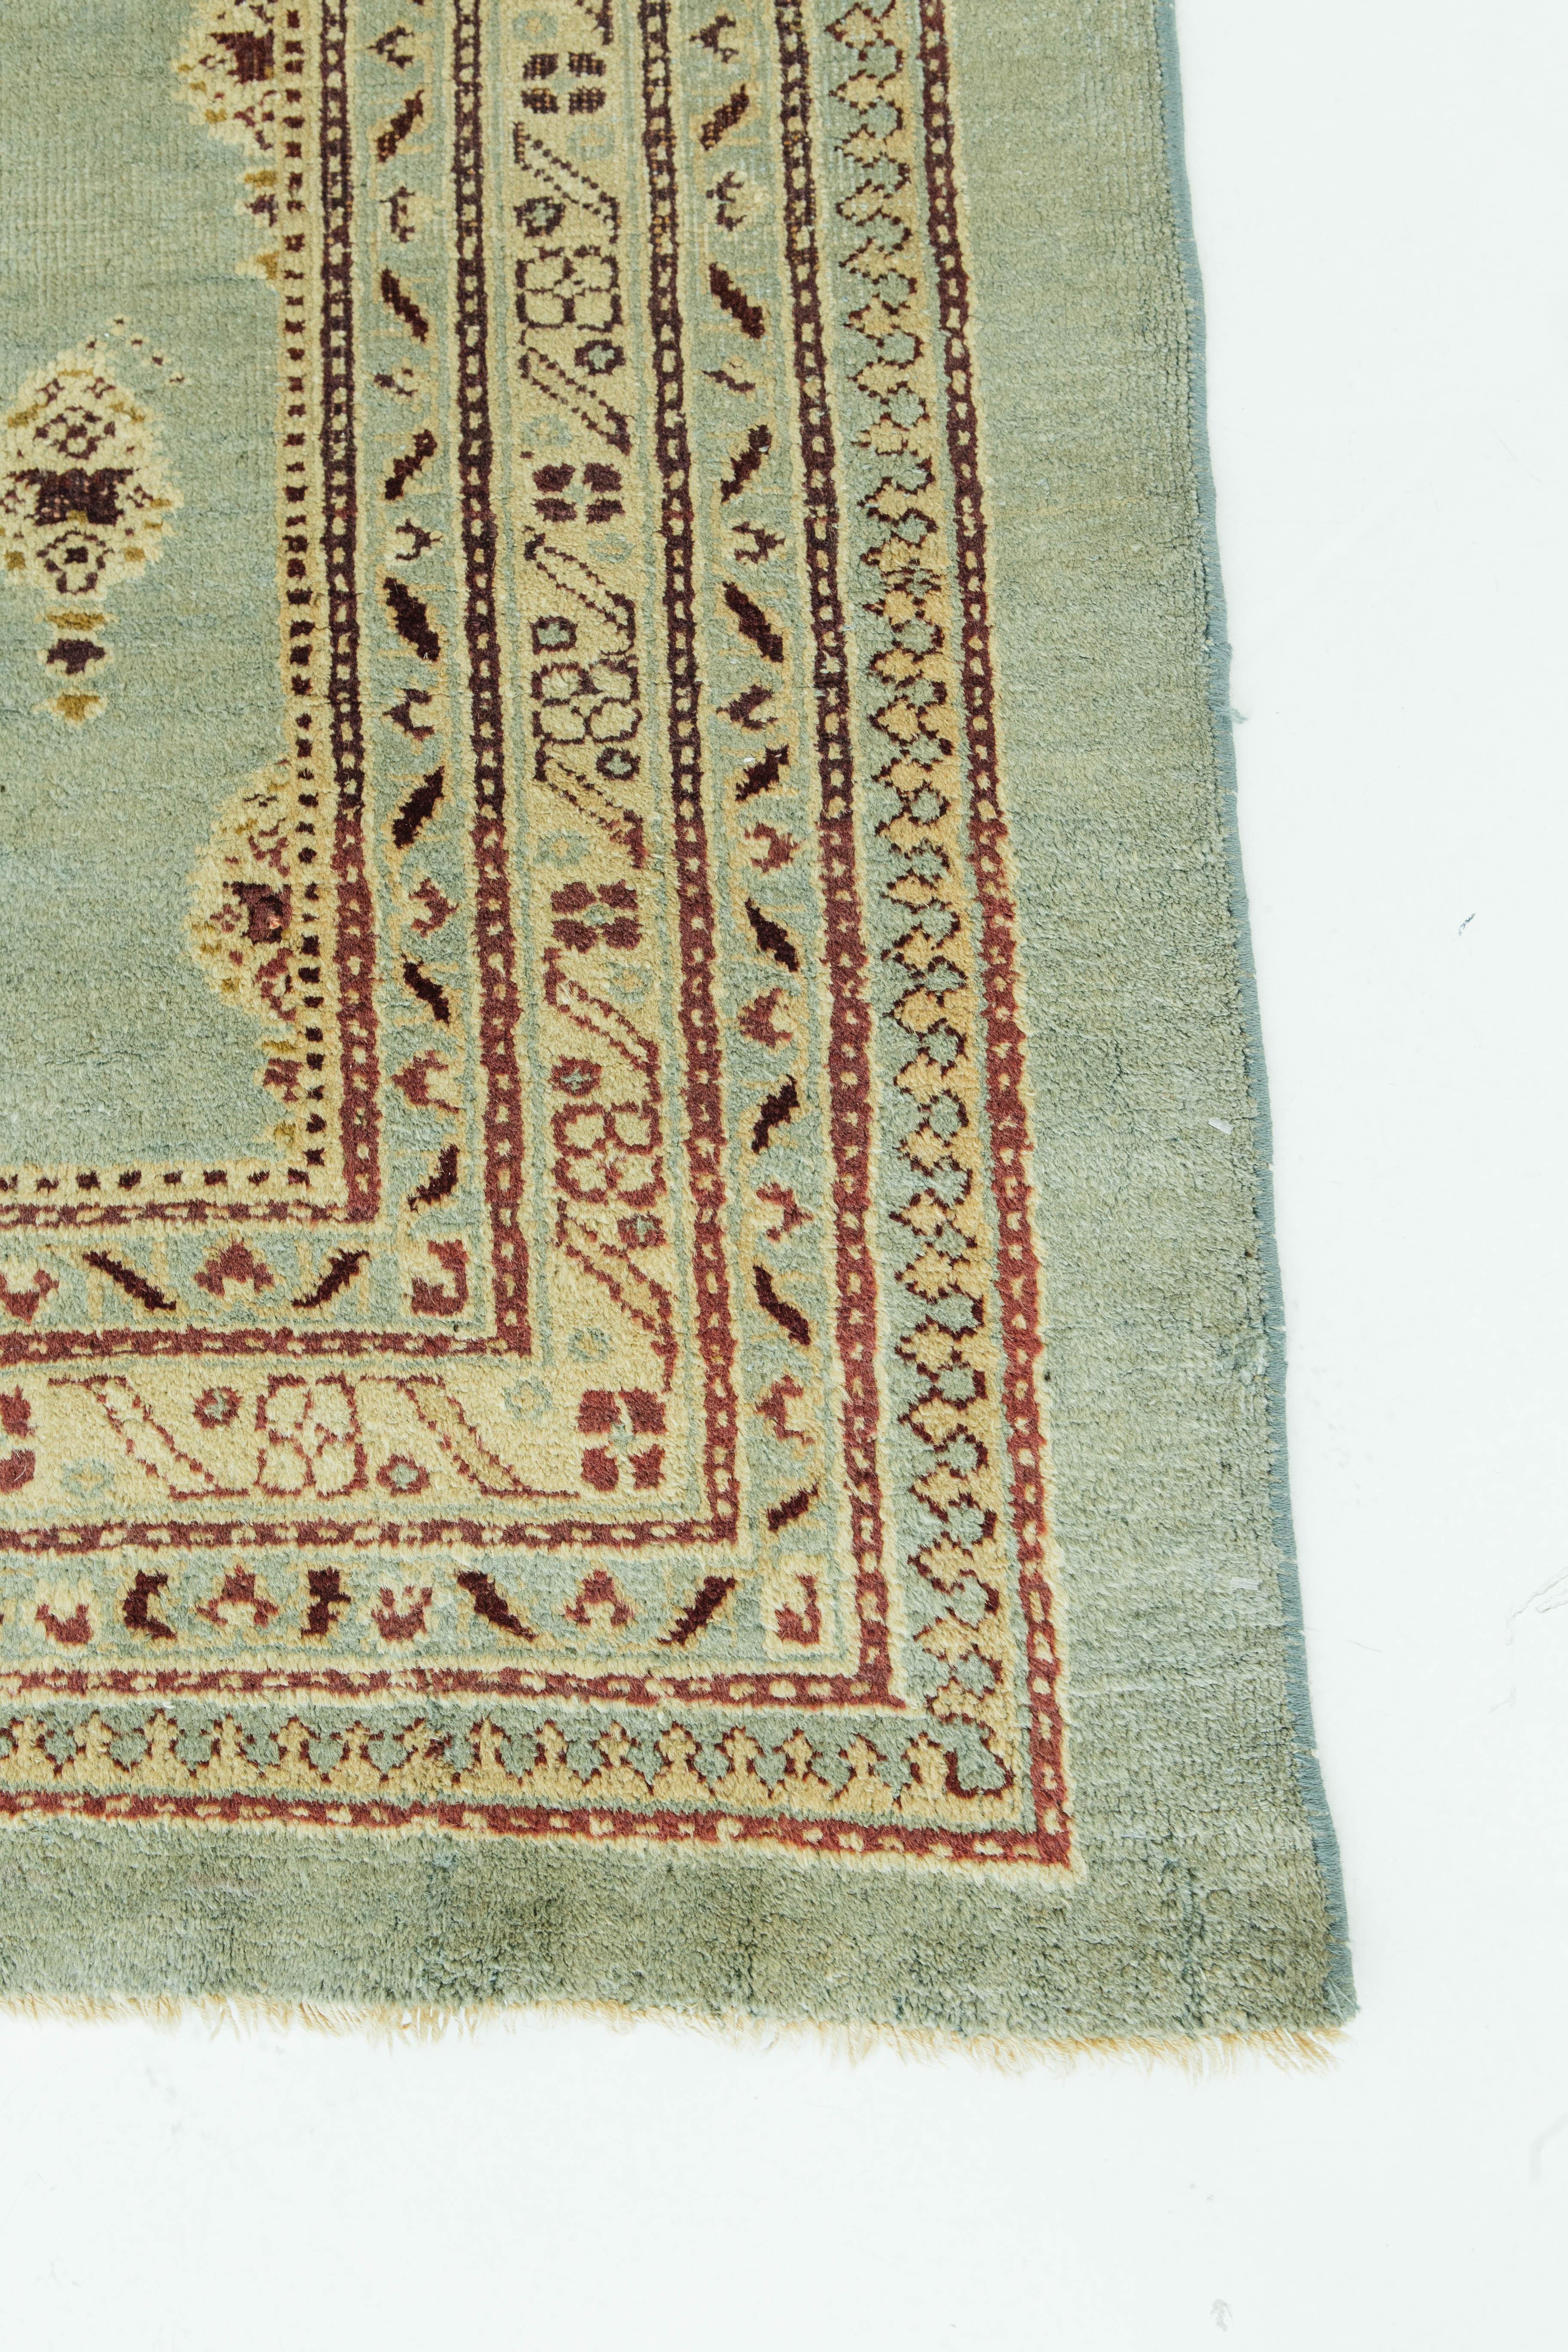 Our antique Indian Amritsar rug is from the Punjab region. As an area heavily populated by the Sikh religion, the influences are seen in this room sized rug. The beautiful greens of this rug will make any white or wood toned application an instant